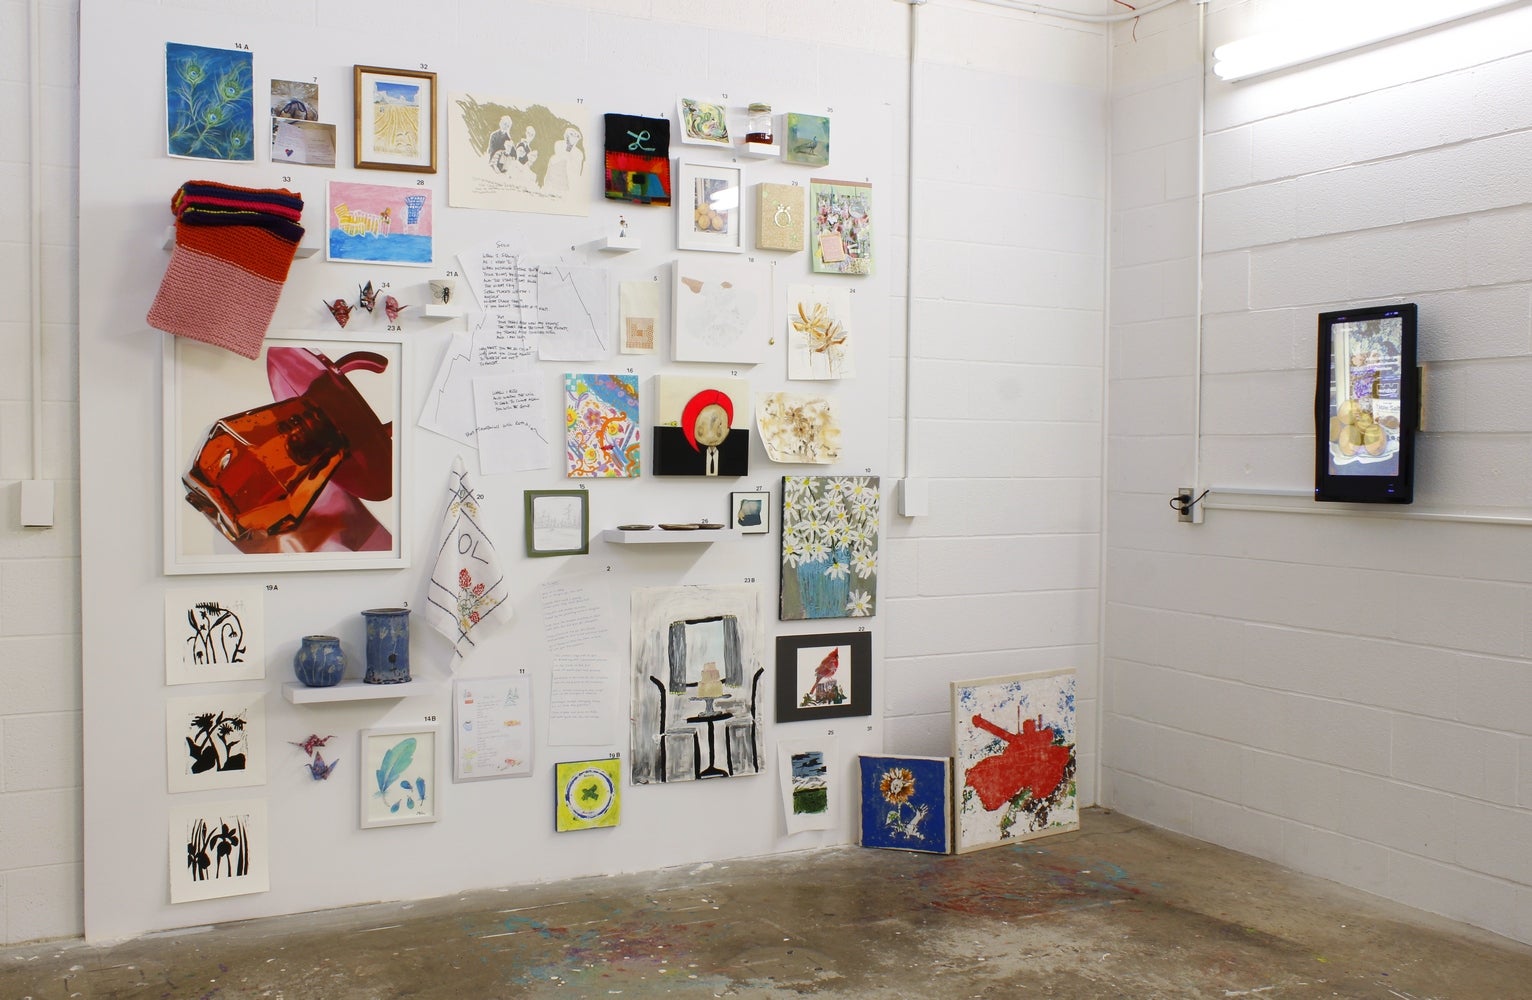 Installation of art in an industrial space. One wall is filled with a variety of works, third wall has small video monitor 